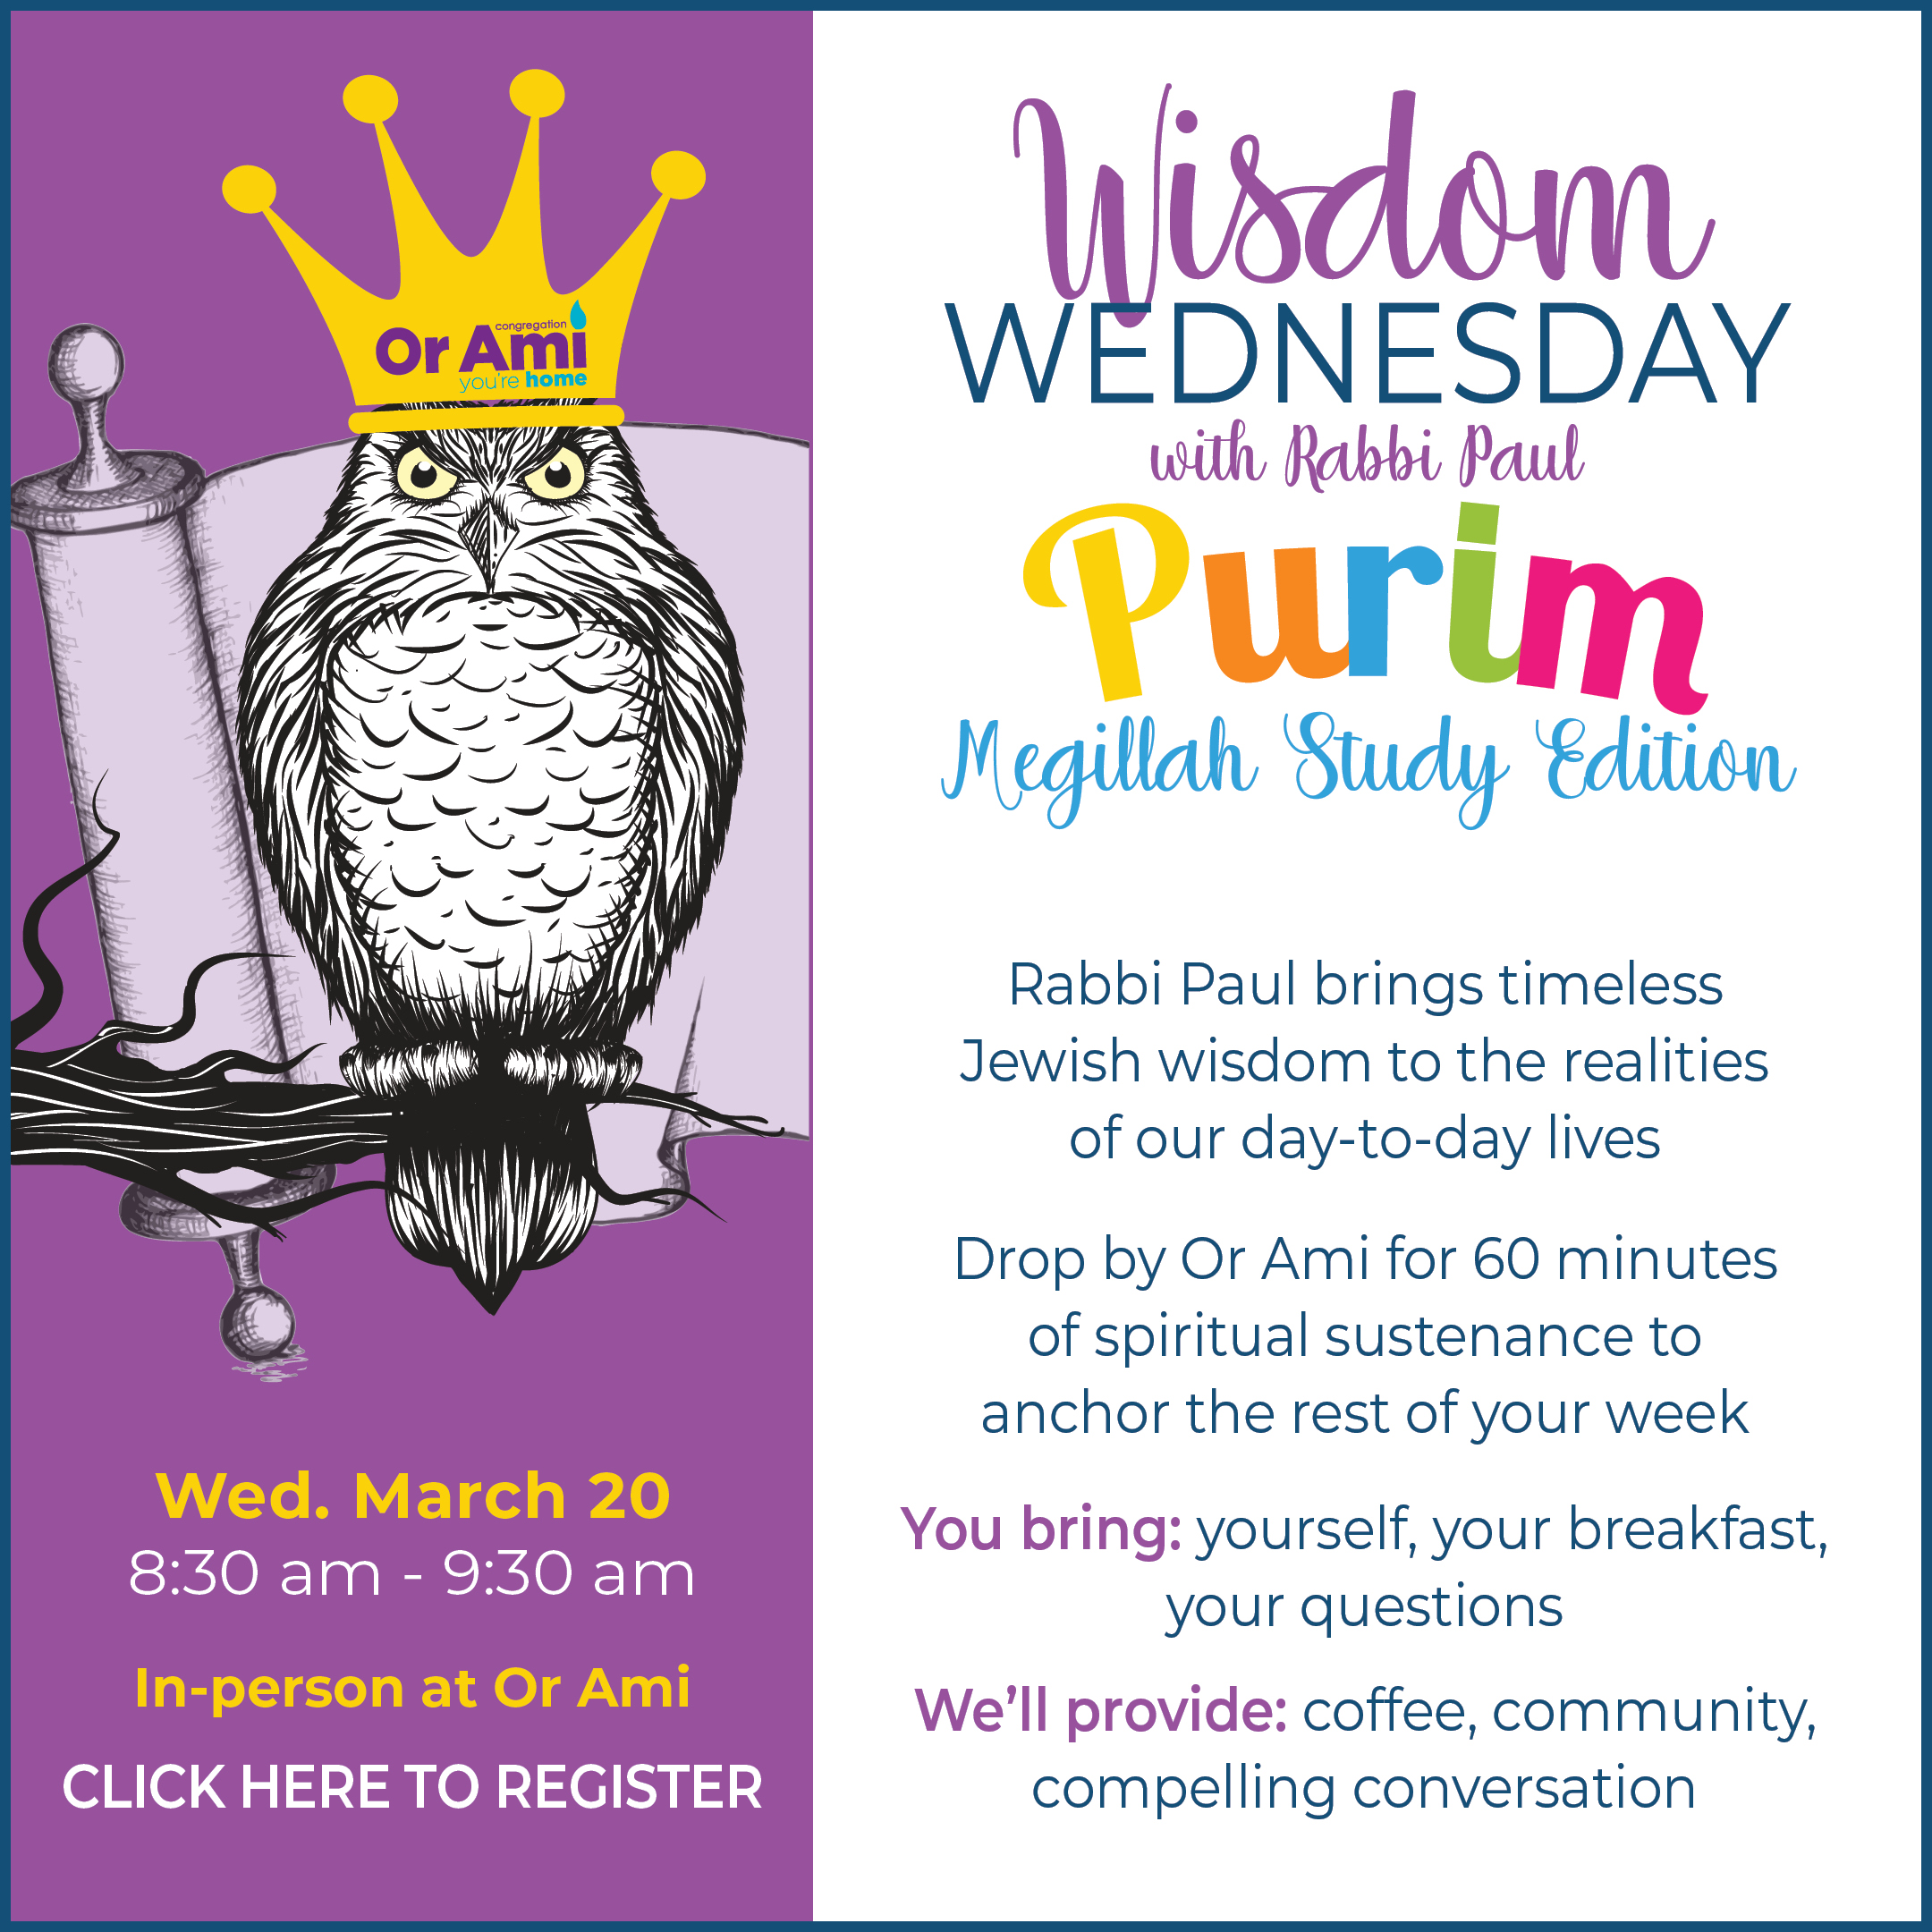 *Or Ami Wisdom Wed March 20 CLICK